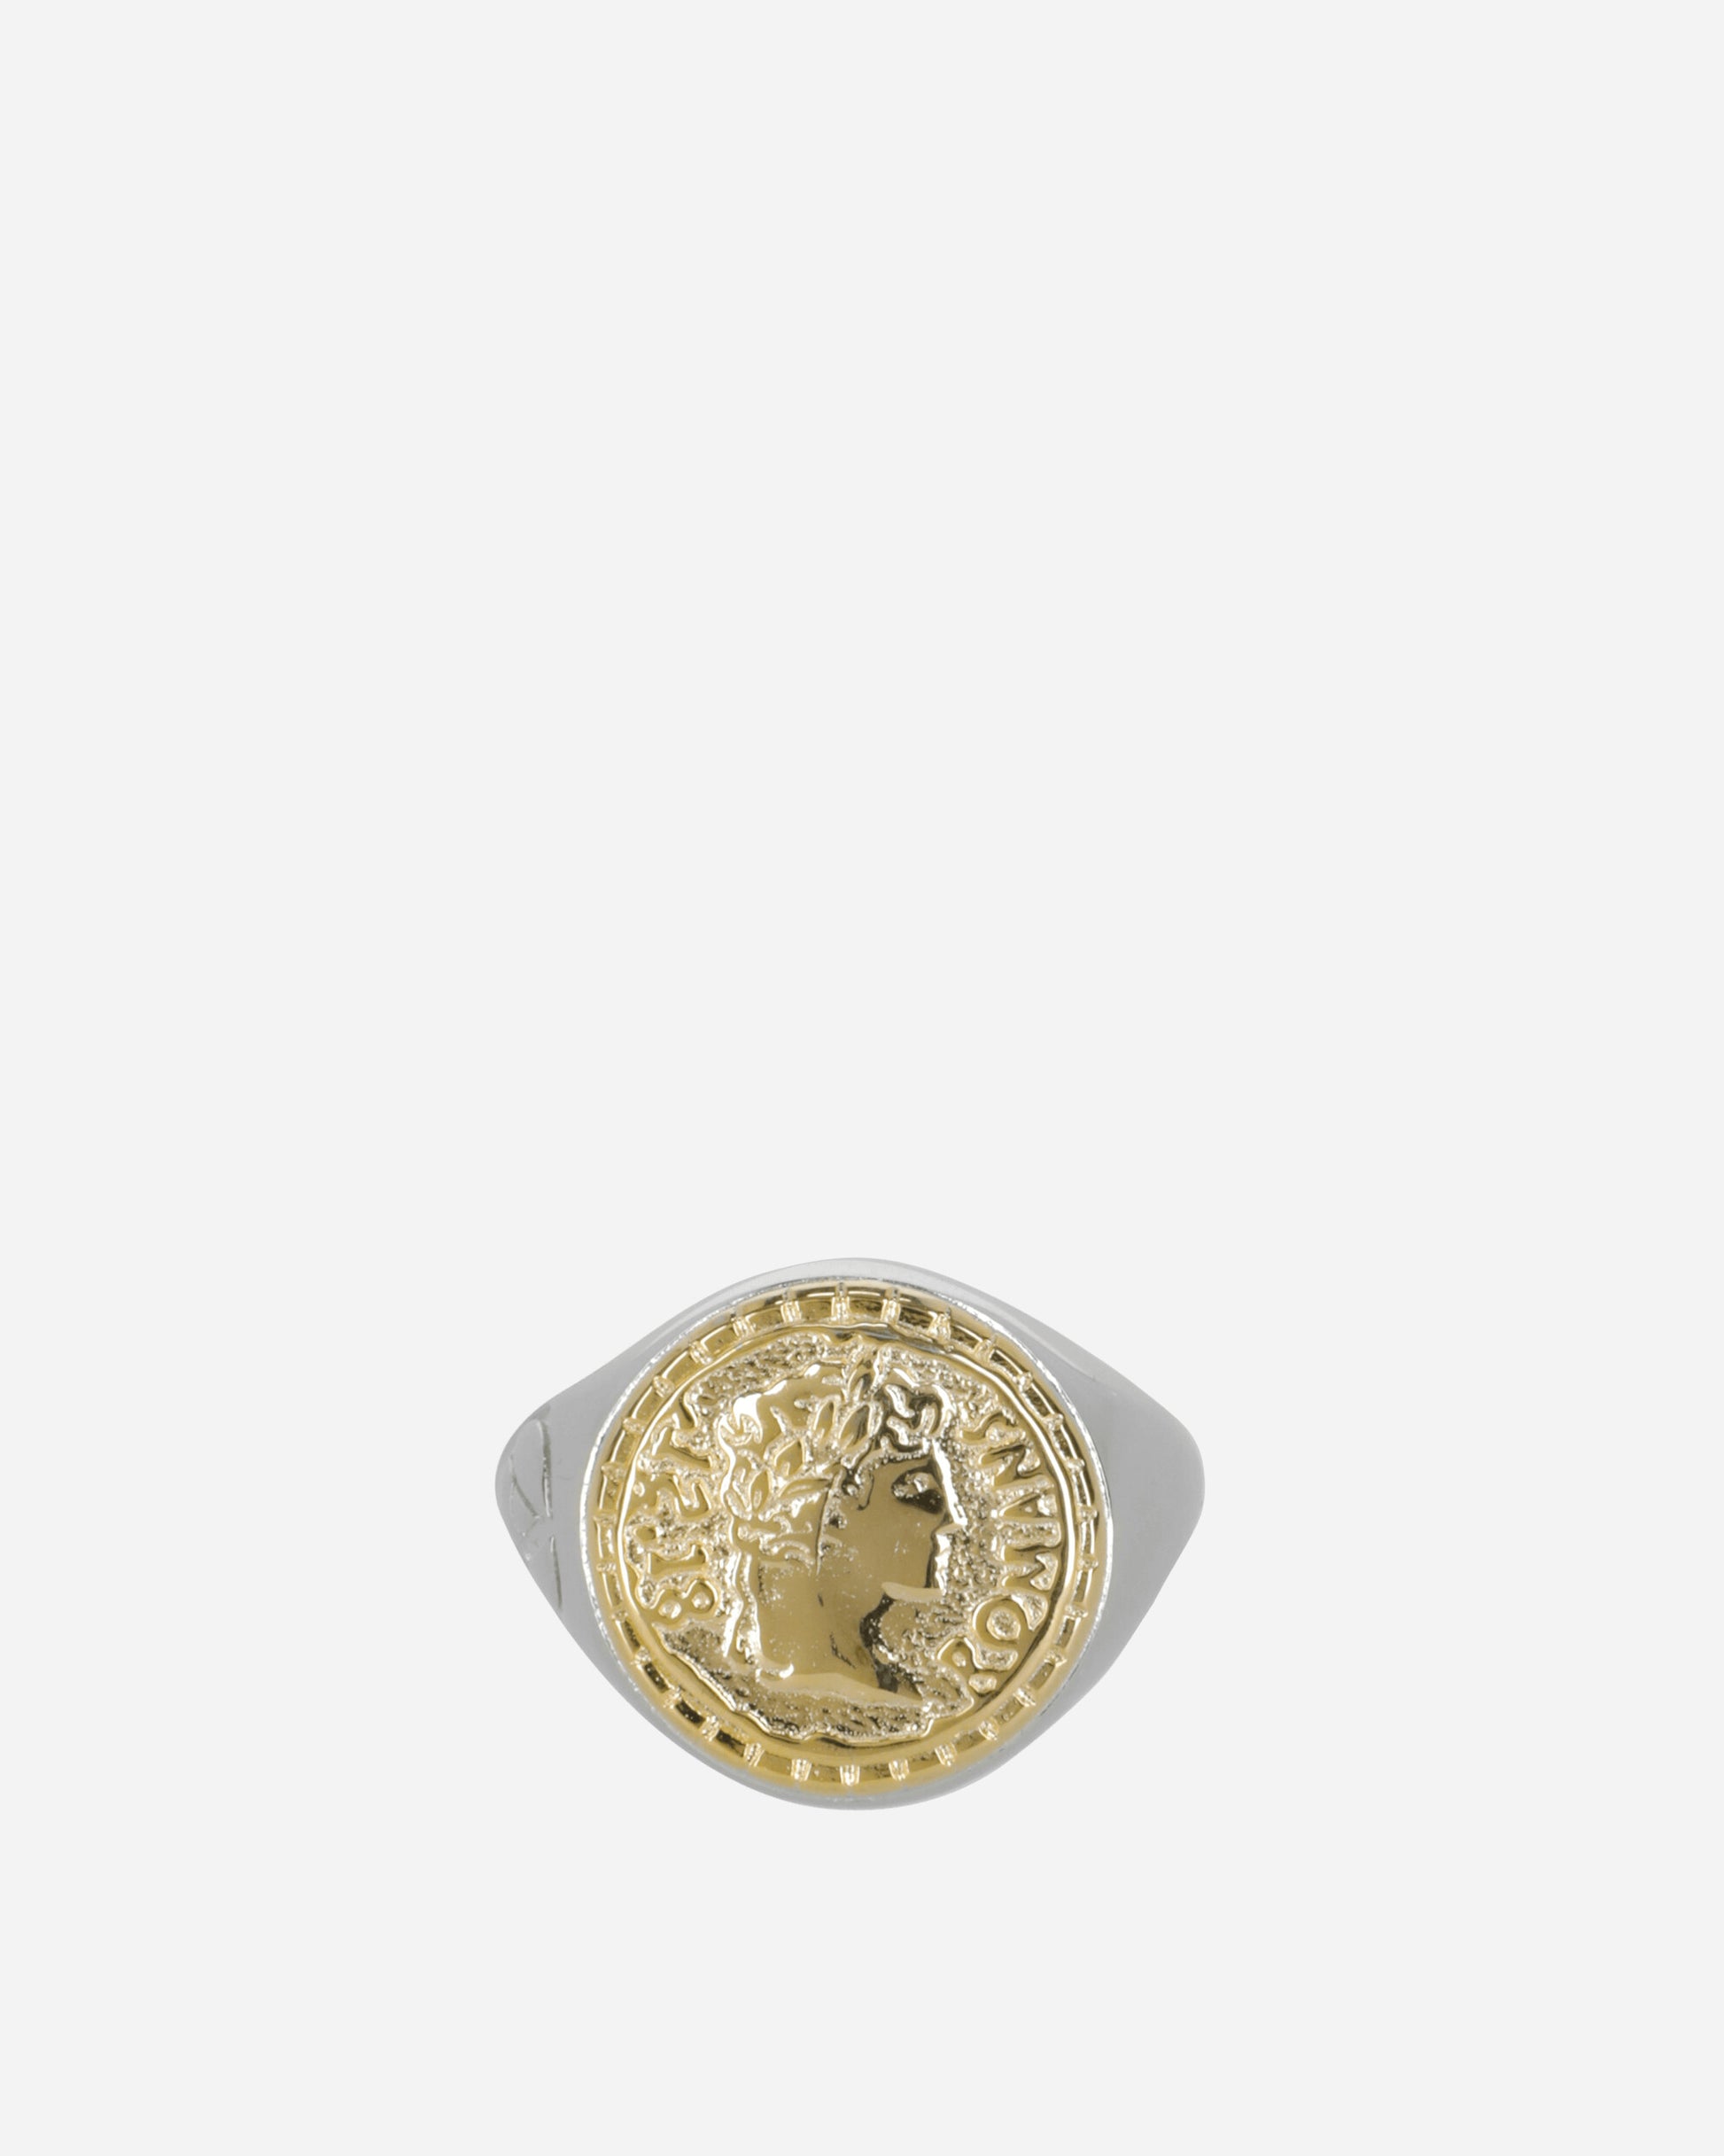 Aries Aries Signet Ring SIlver/Gold Jewellery Rings FUAR90103 SG